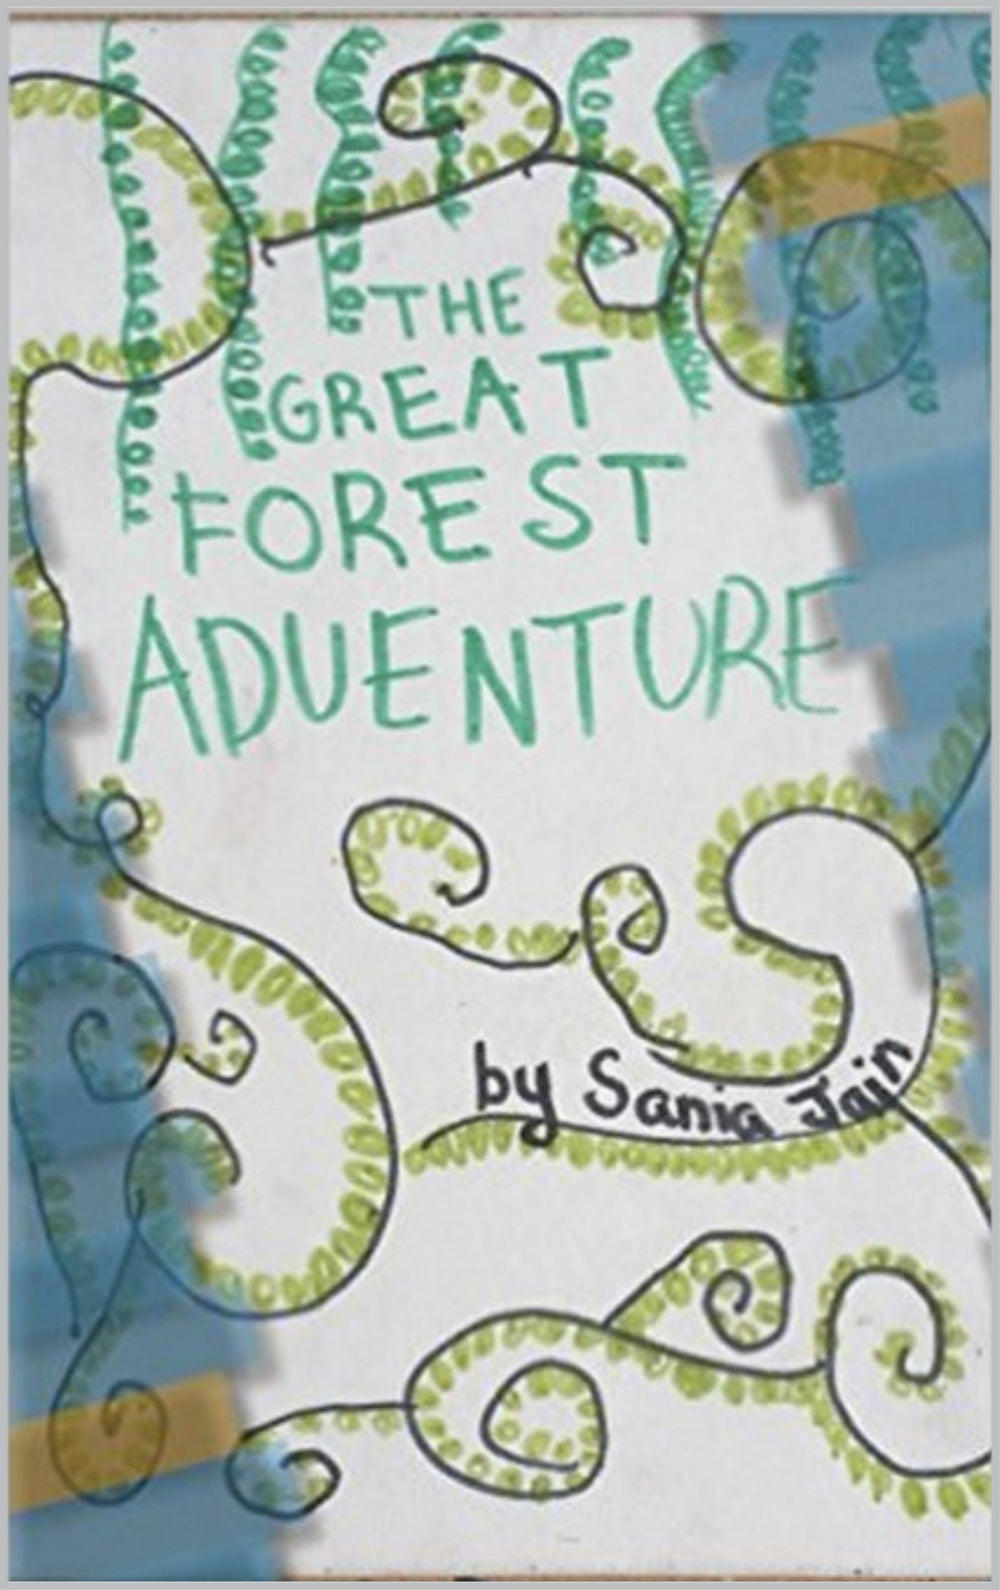 The Great Forest Adventure